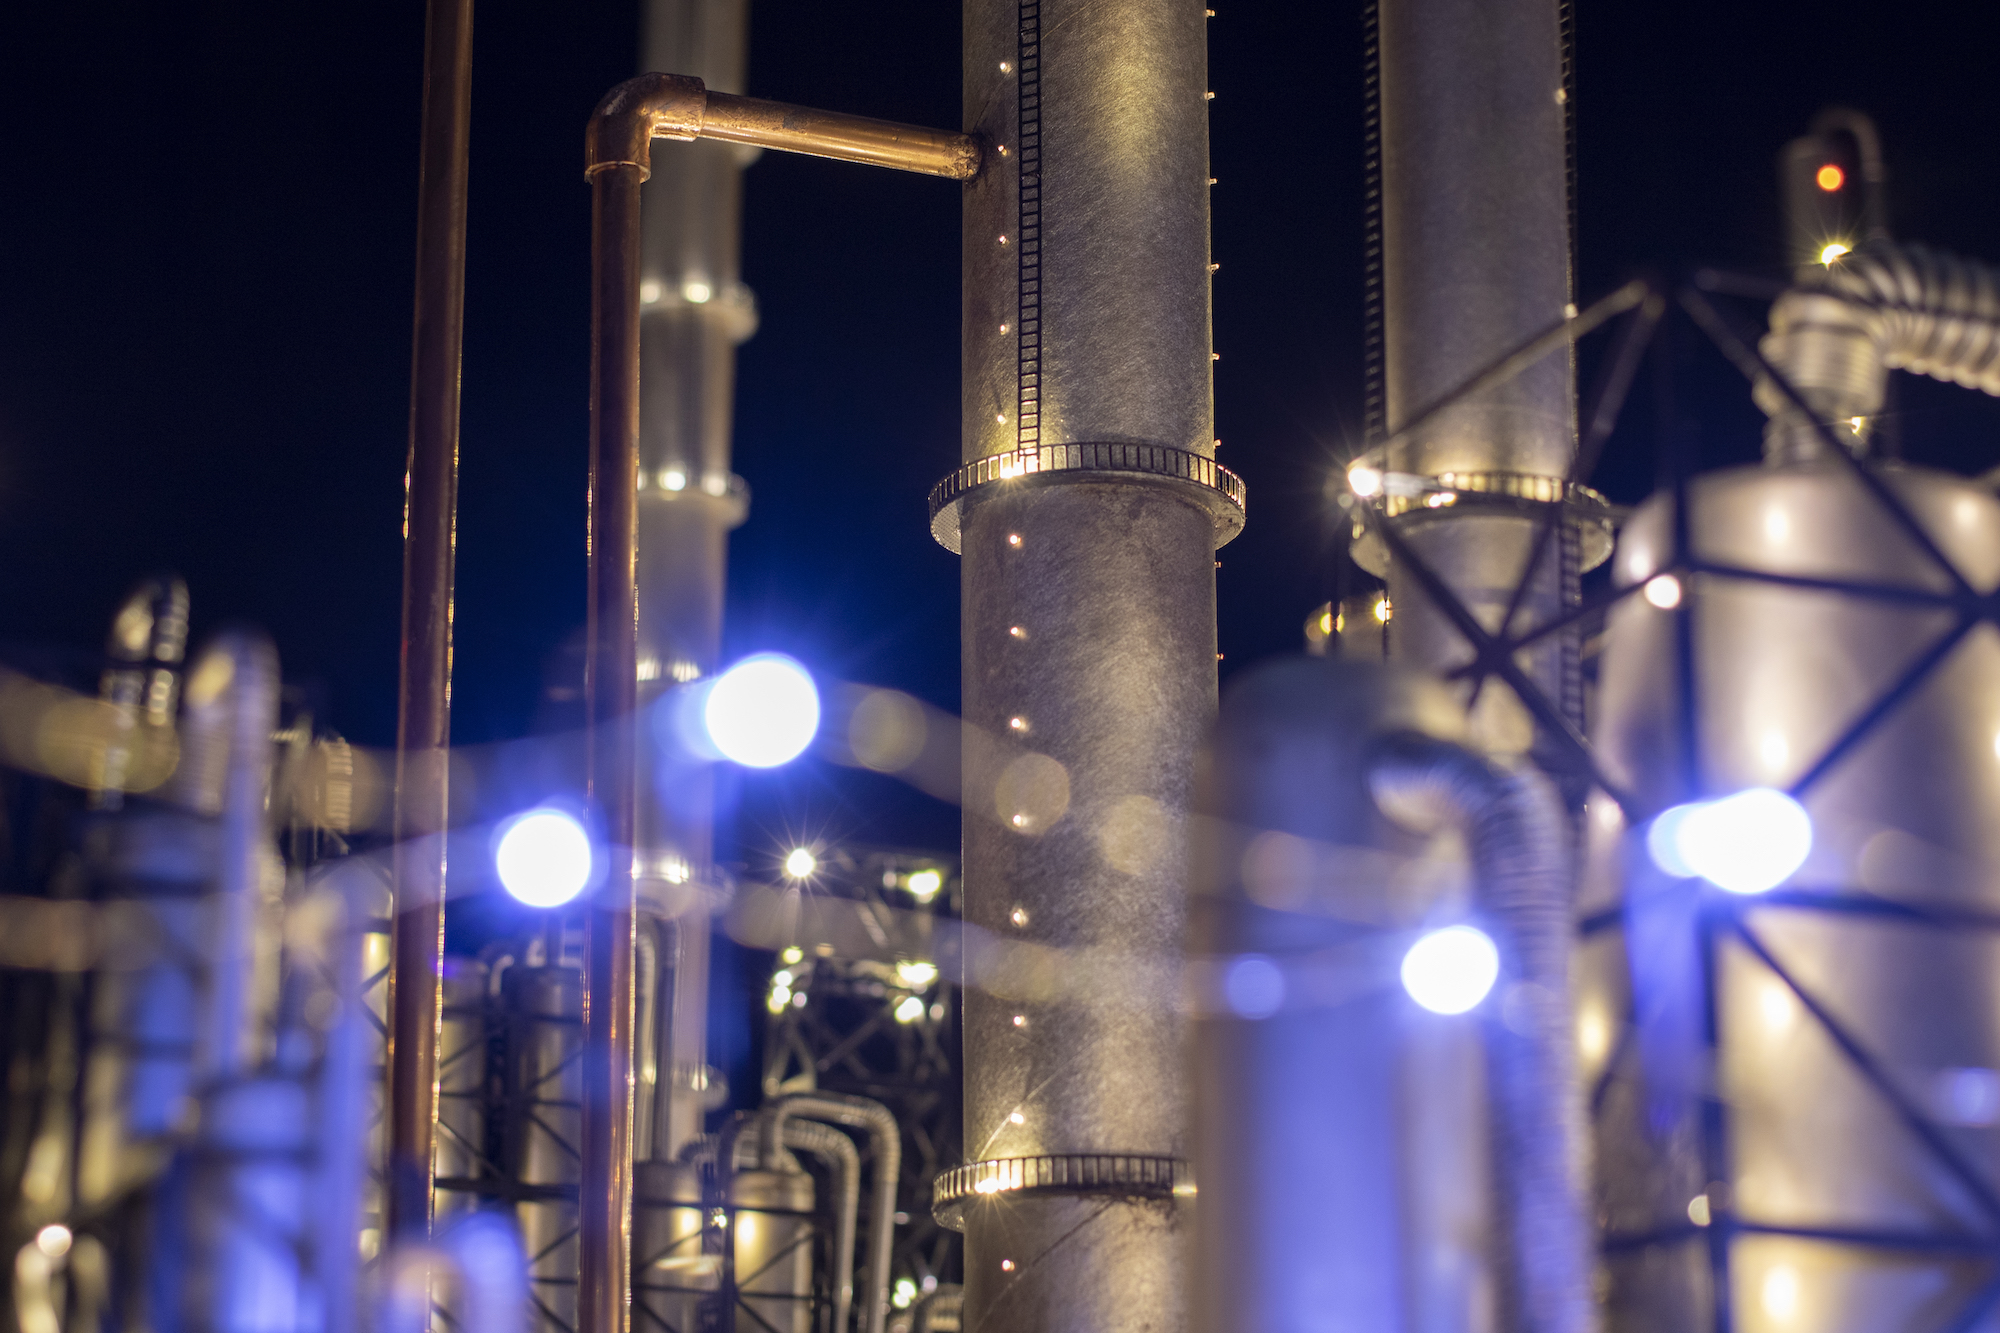 A close up of what look like structures within an oil refinery, long tubes extending up and down, but upon closer inspection these are miniatures simulating the actual structures.